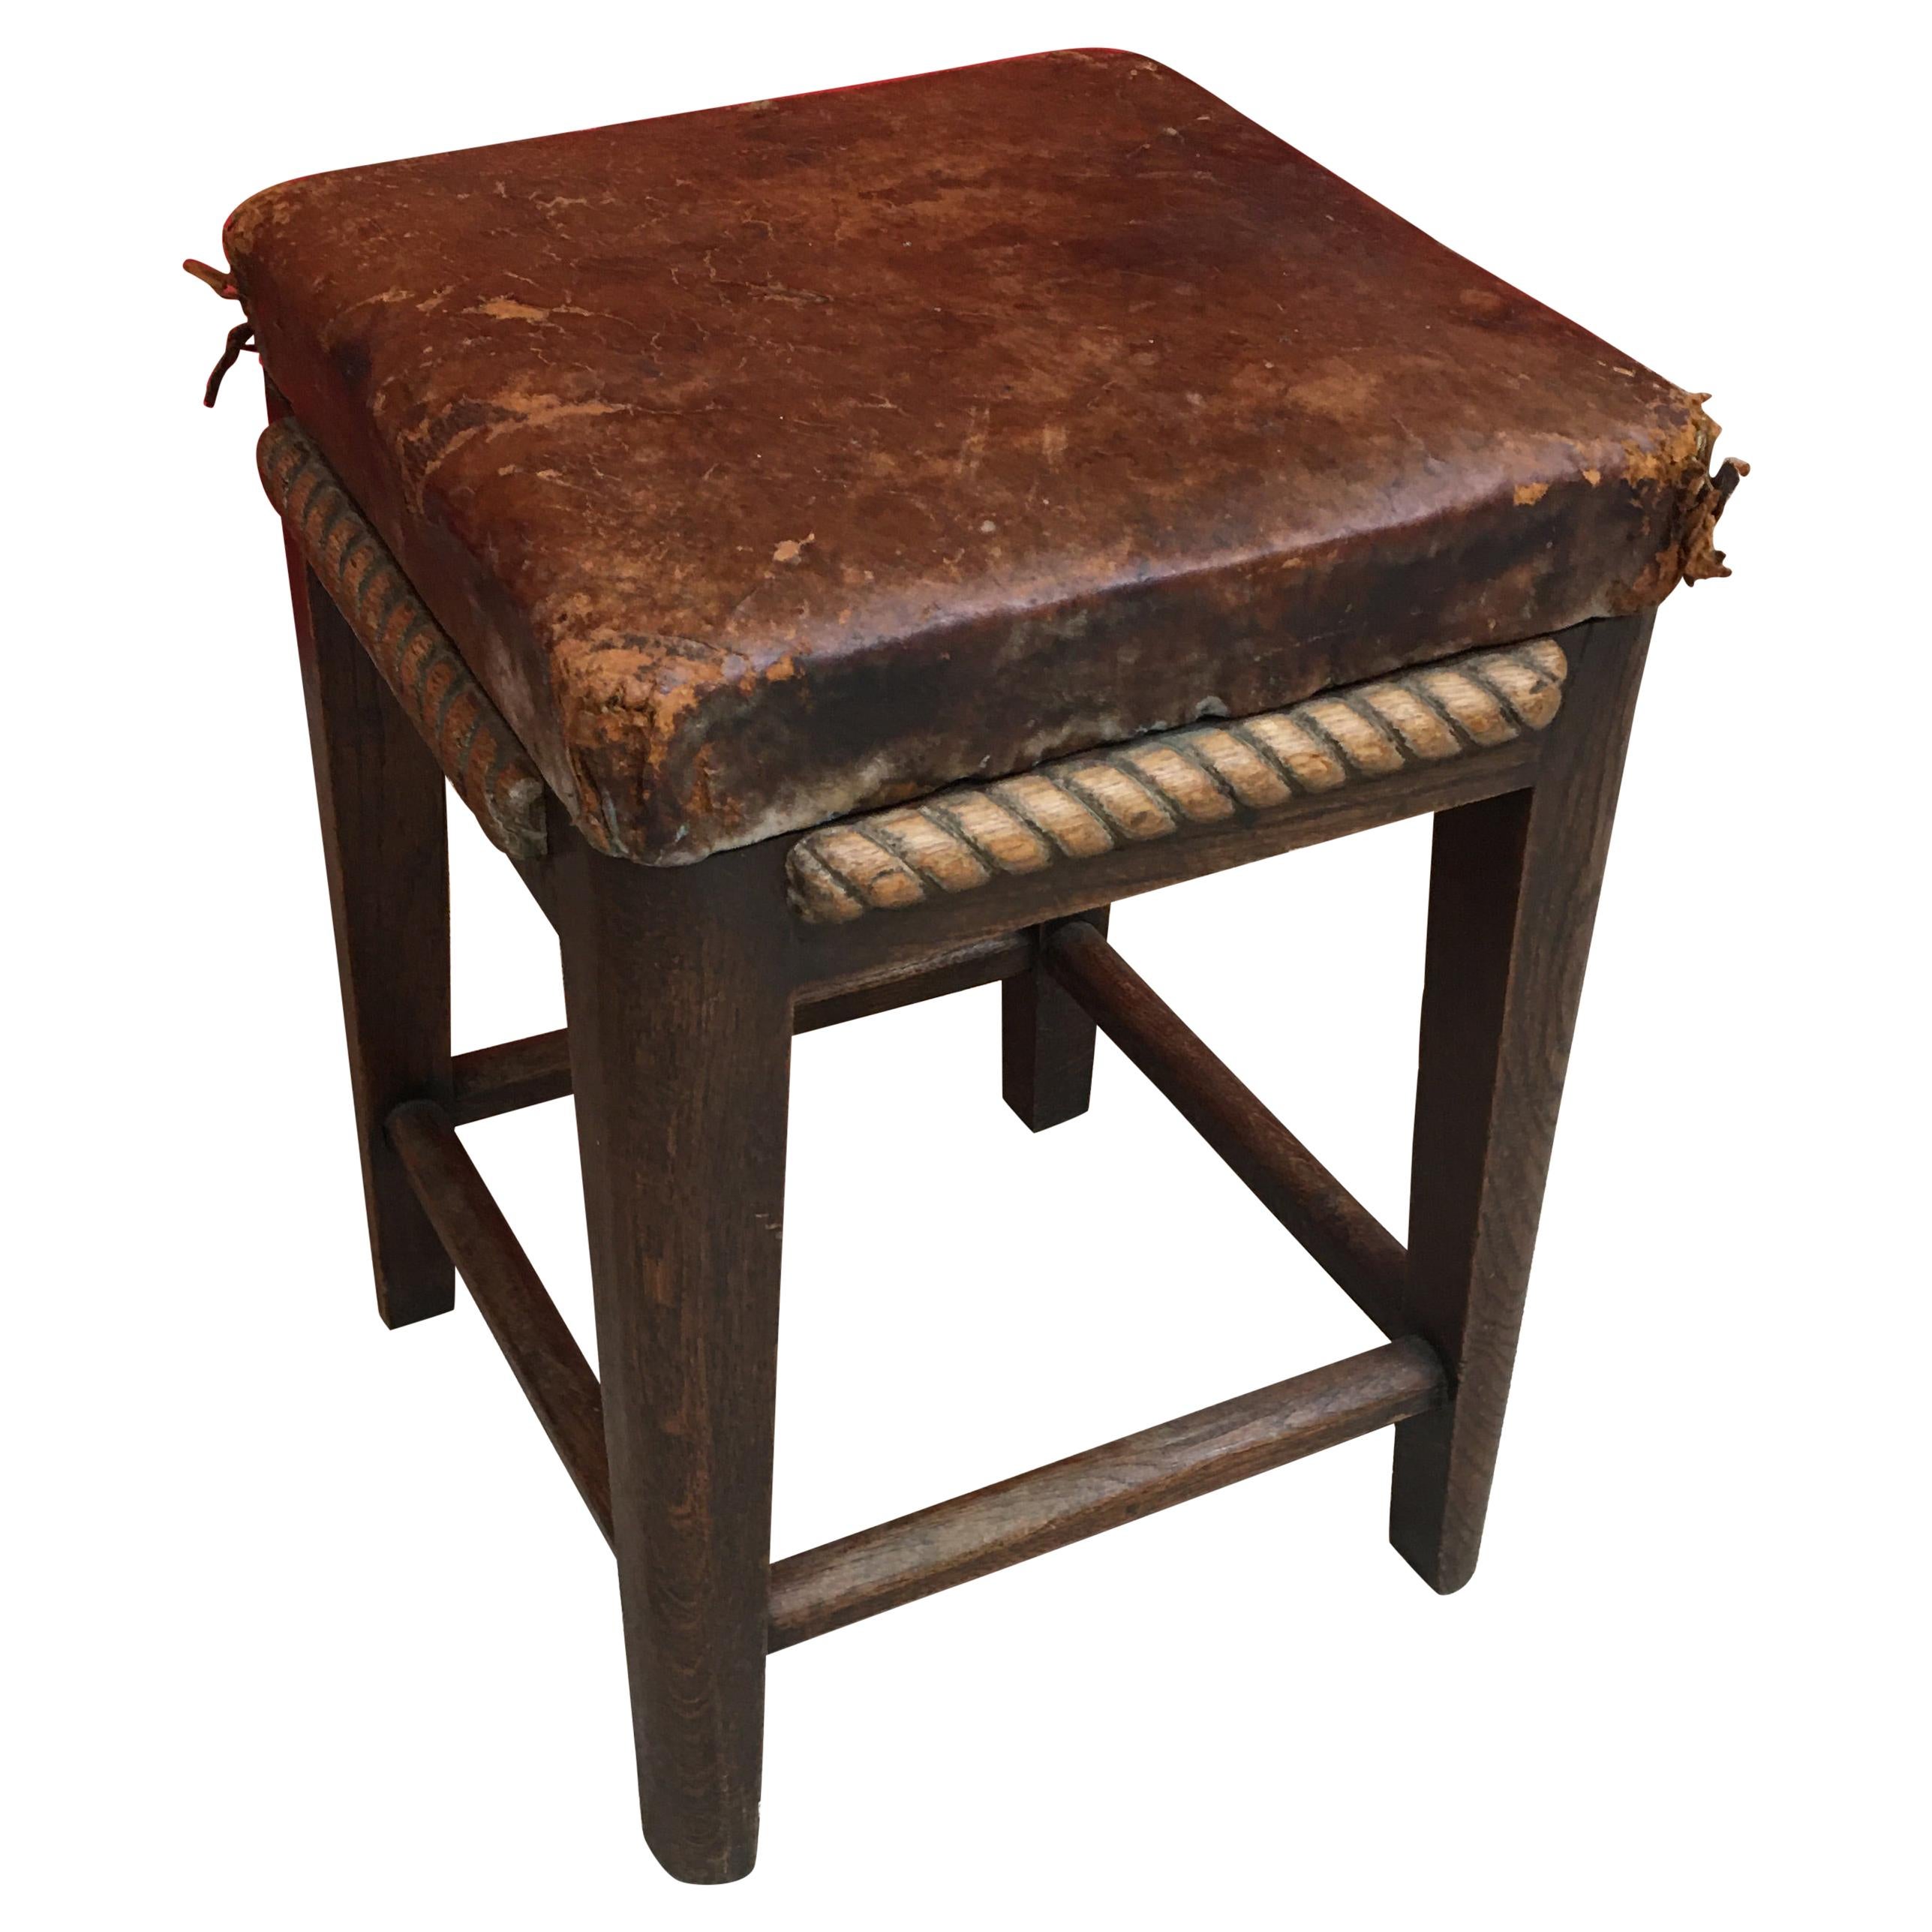 Art Deco Stool in Oak and Leather circa 1950, Carved Wooden Rope Decor